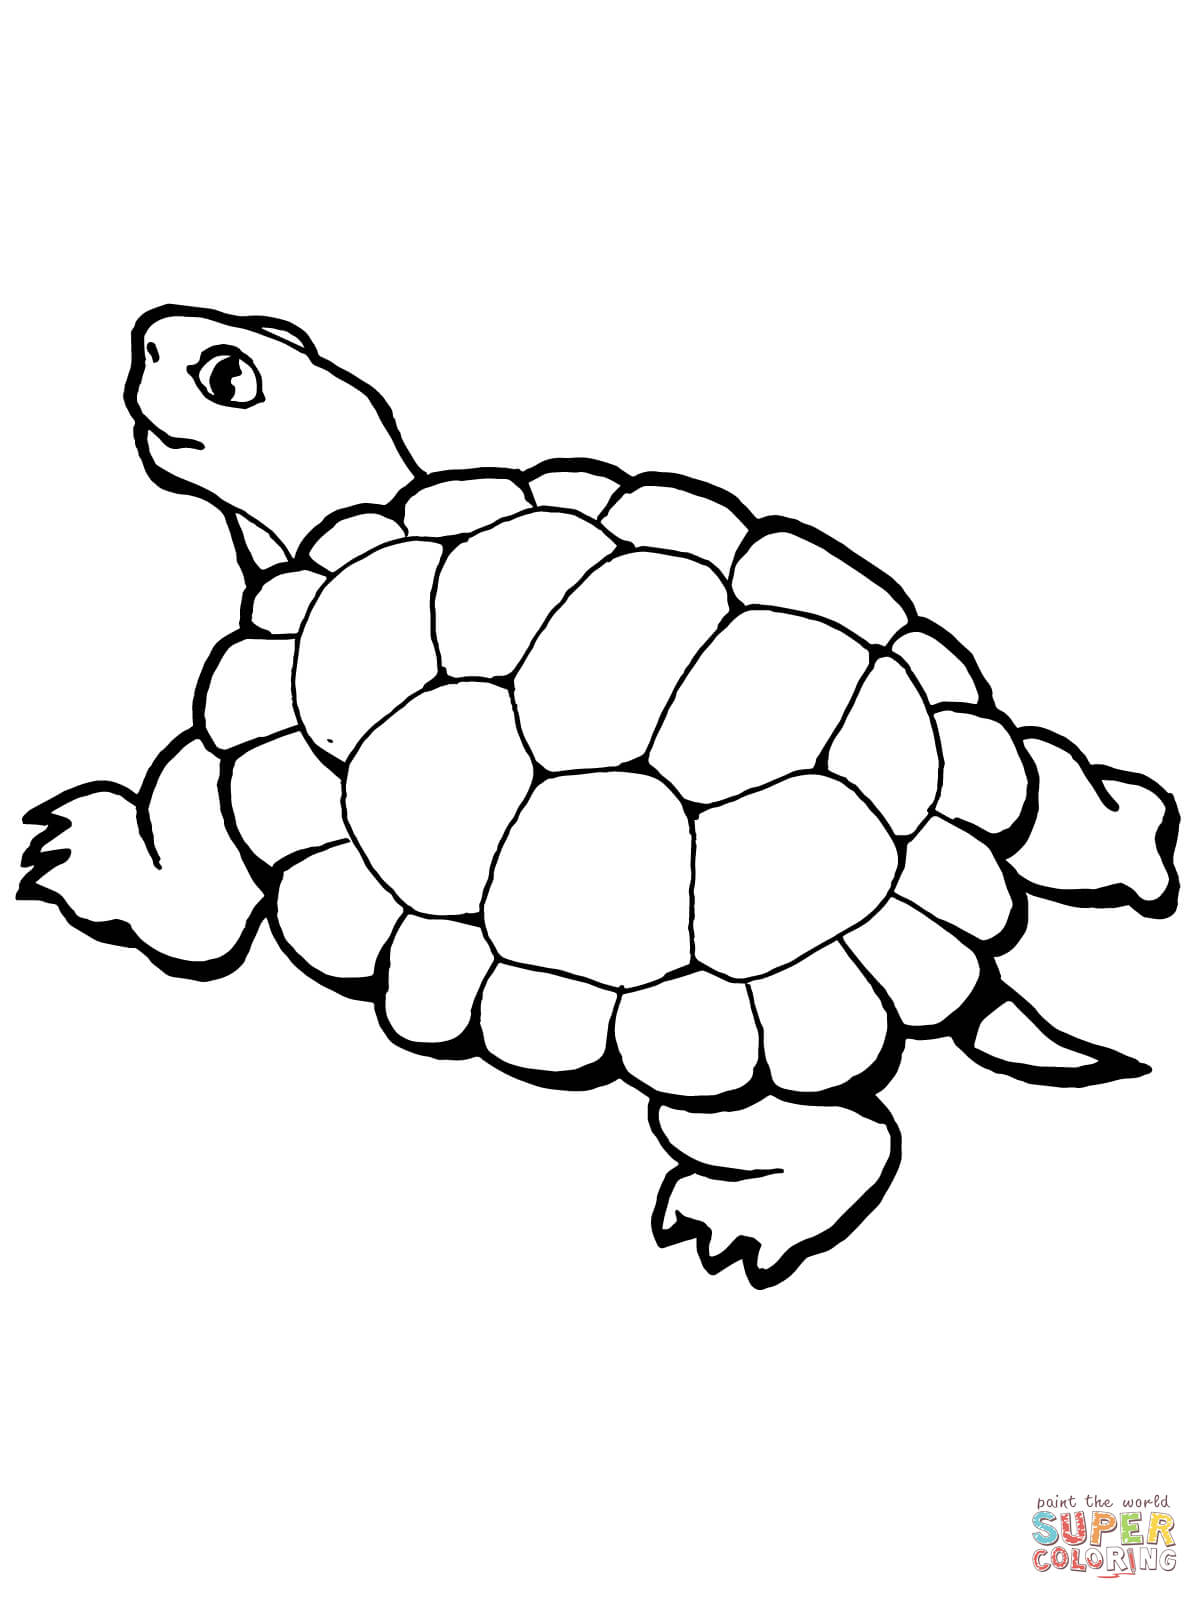 Walking Tortoise coloring page | Free Printable Coloring Pages